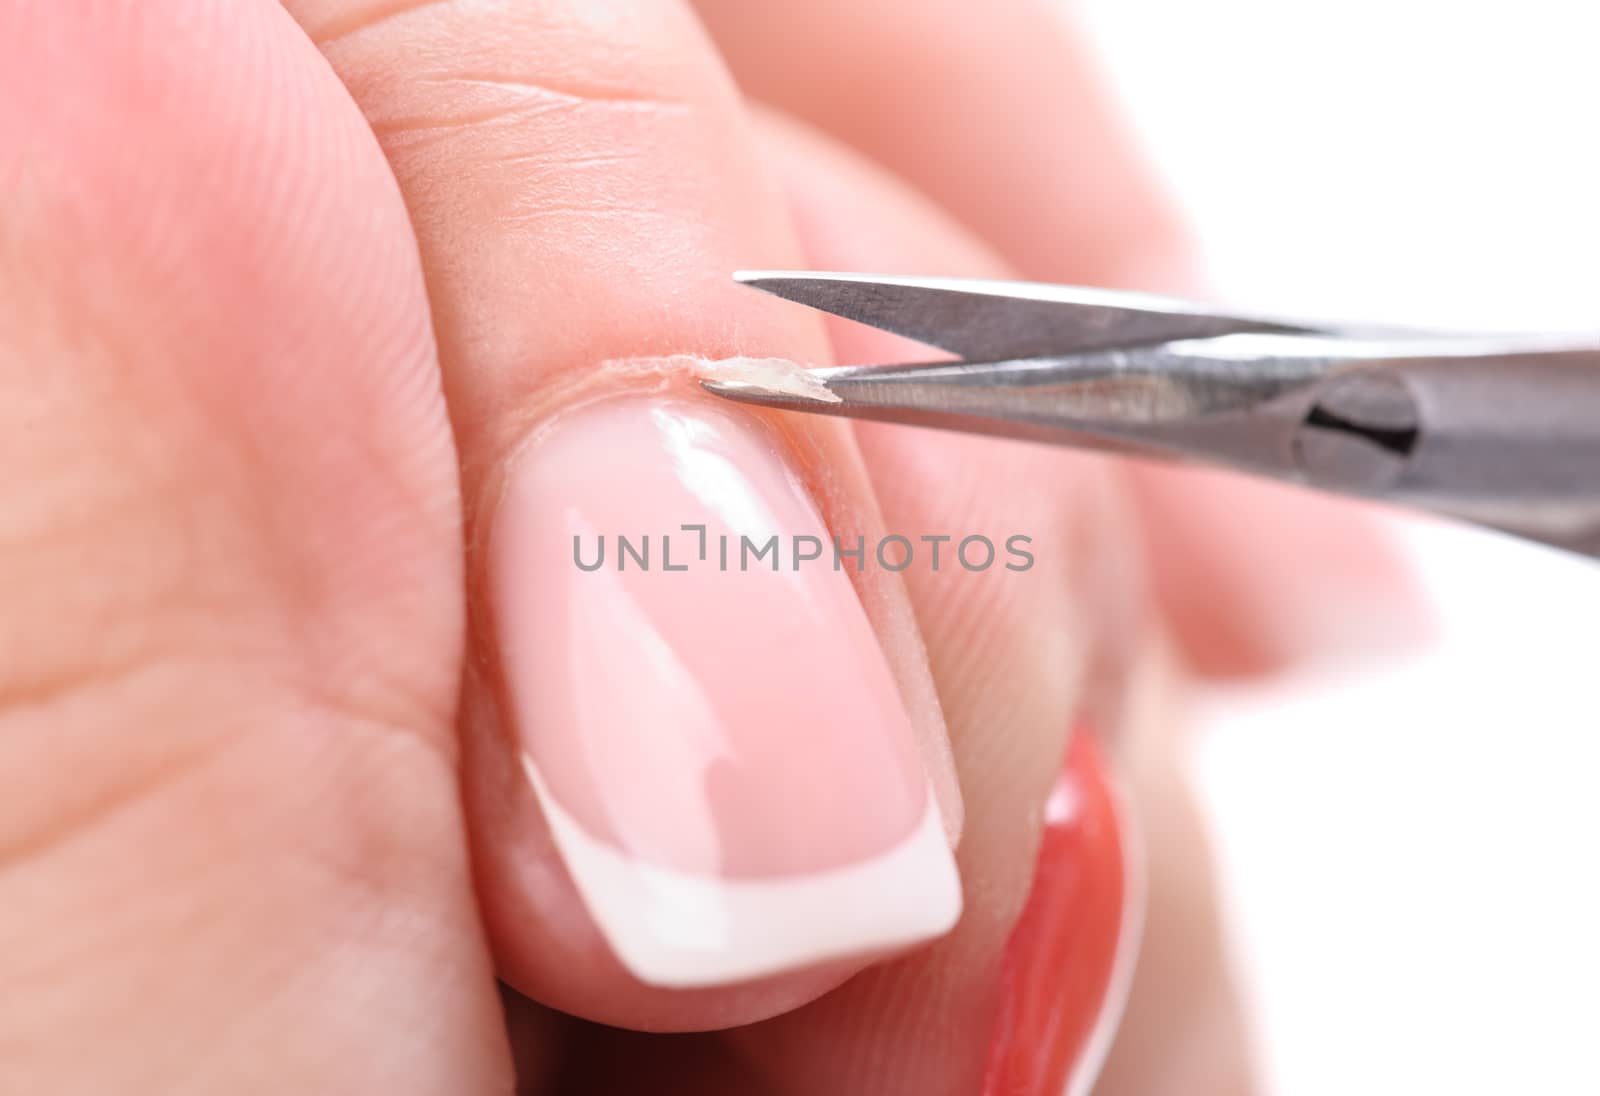 manicure applying - cutting the cuticle  by starush